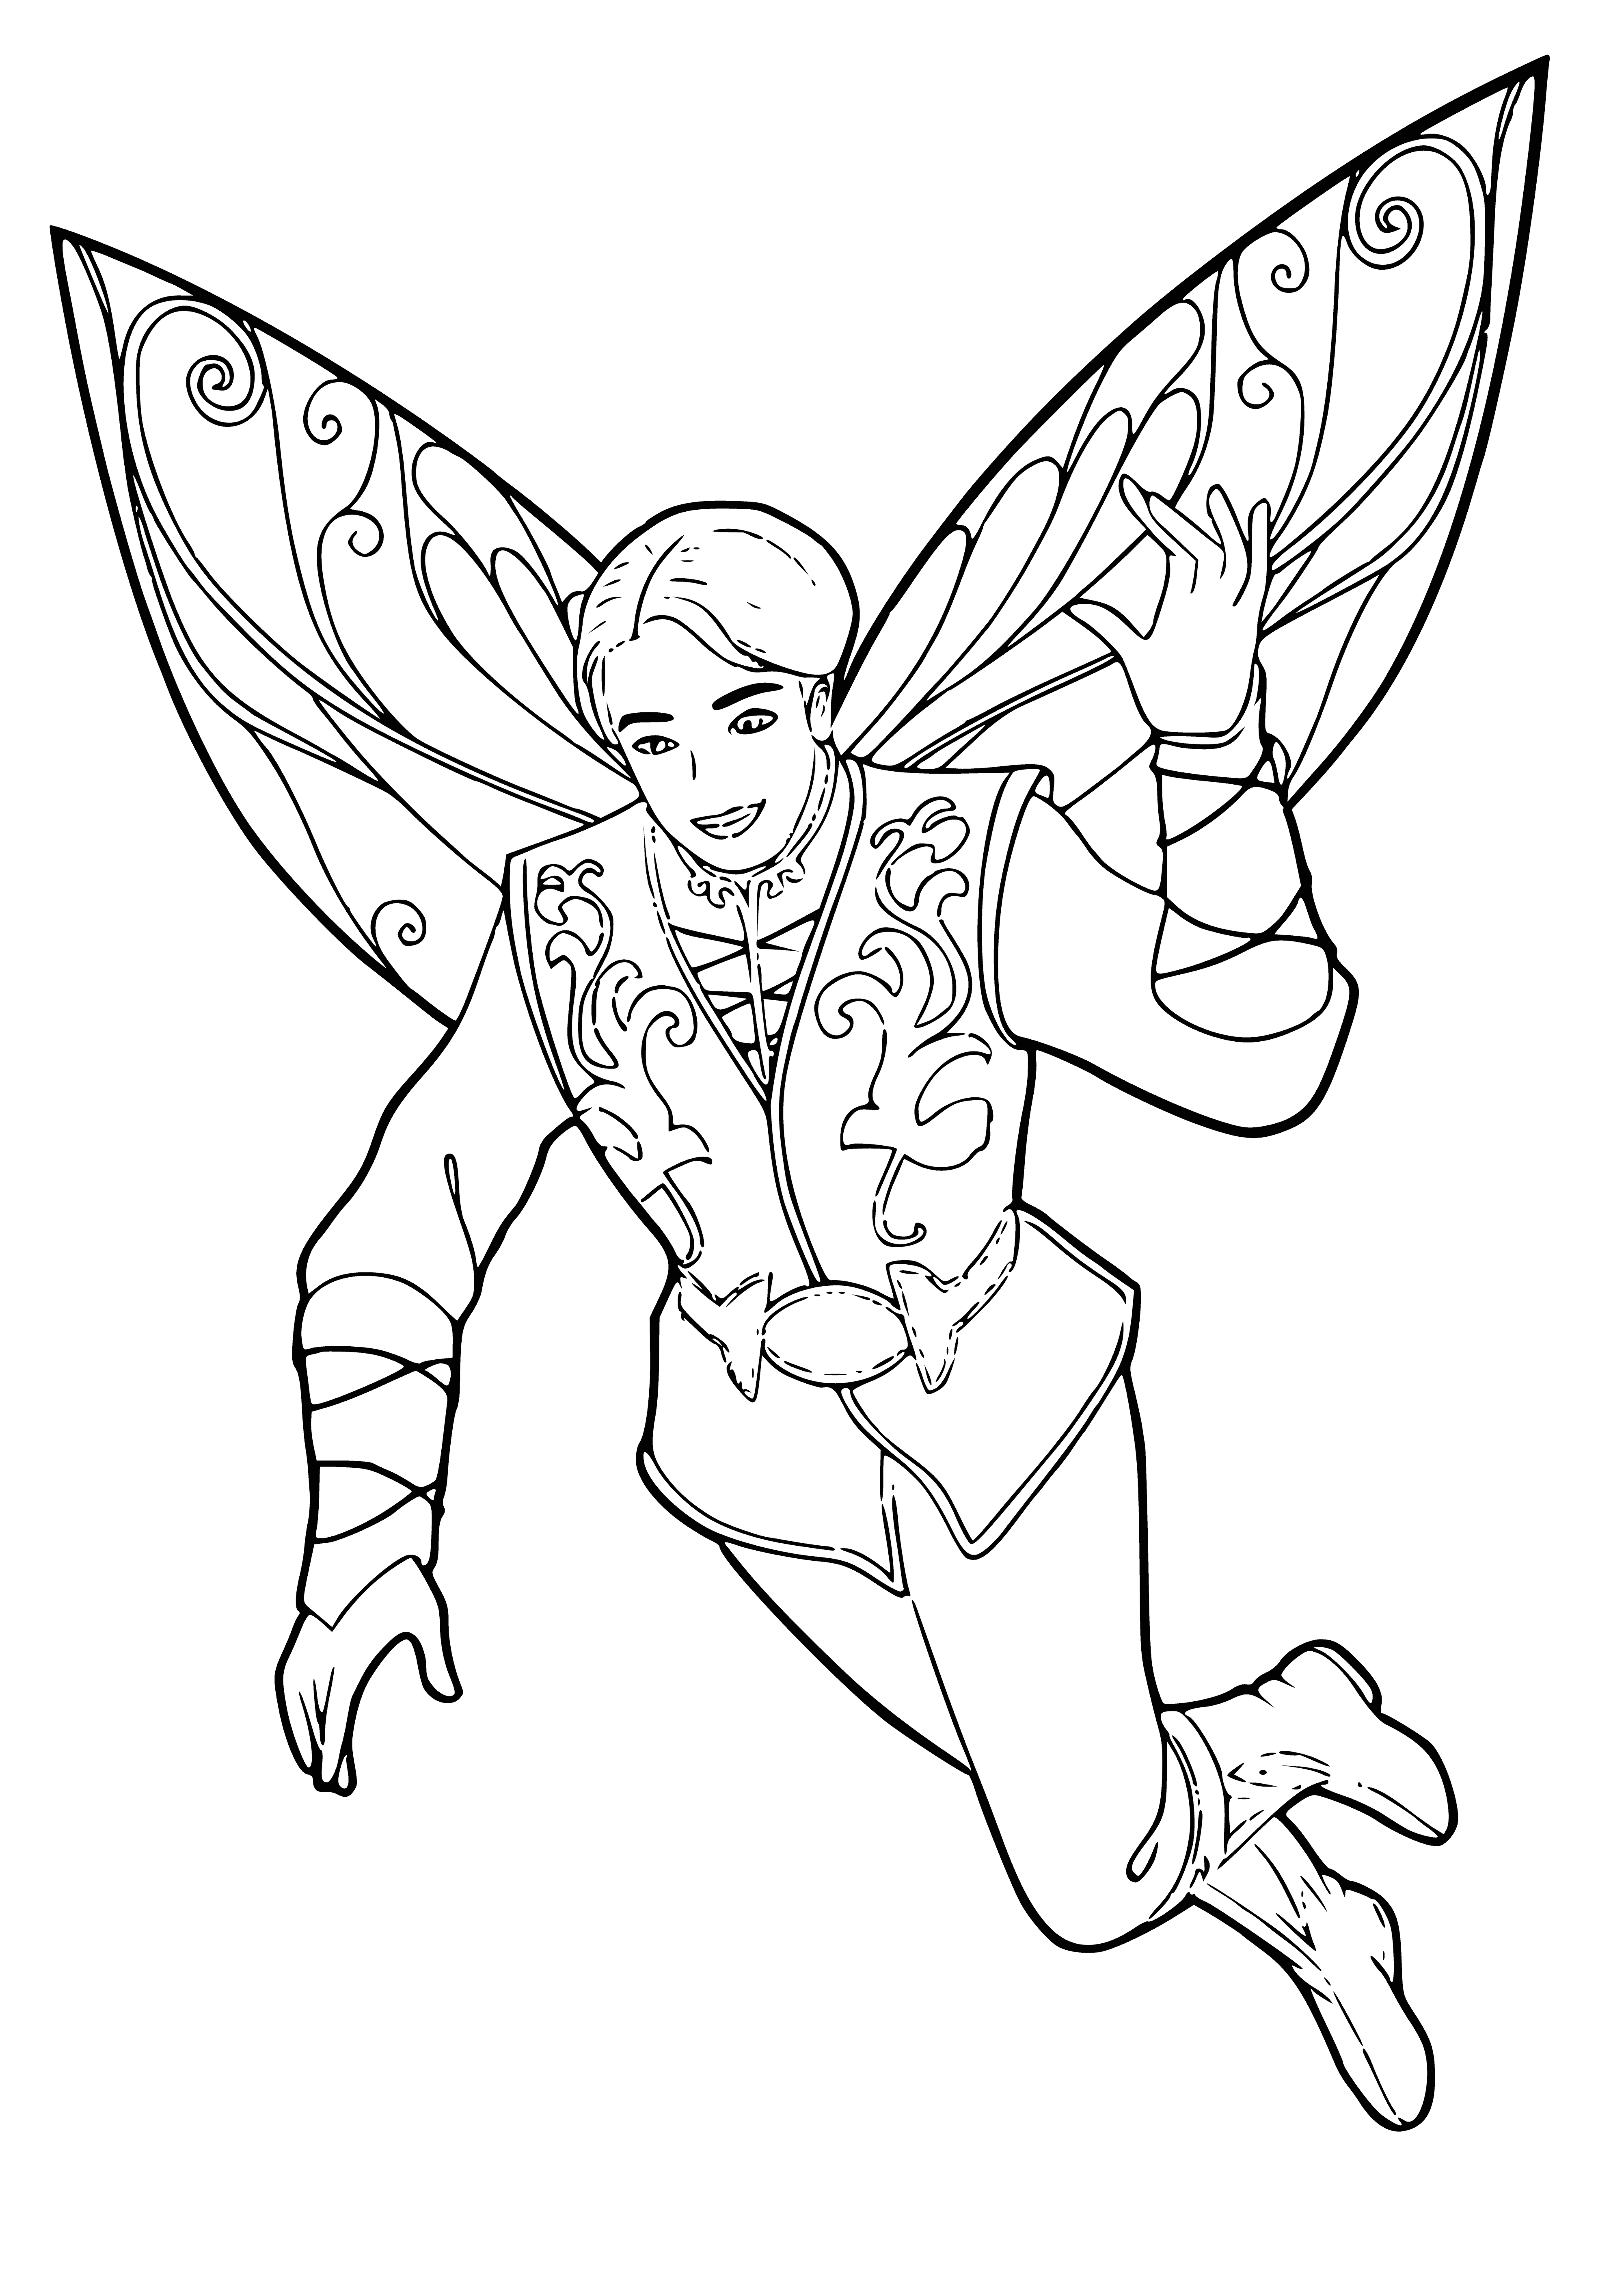 coloring page: Prince Carlos is a magical Barbie with blue shirt, white collar, purple vest, black pants, blue shoes, and bright wings.